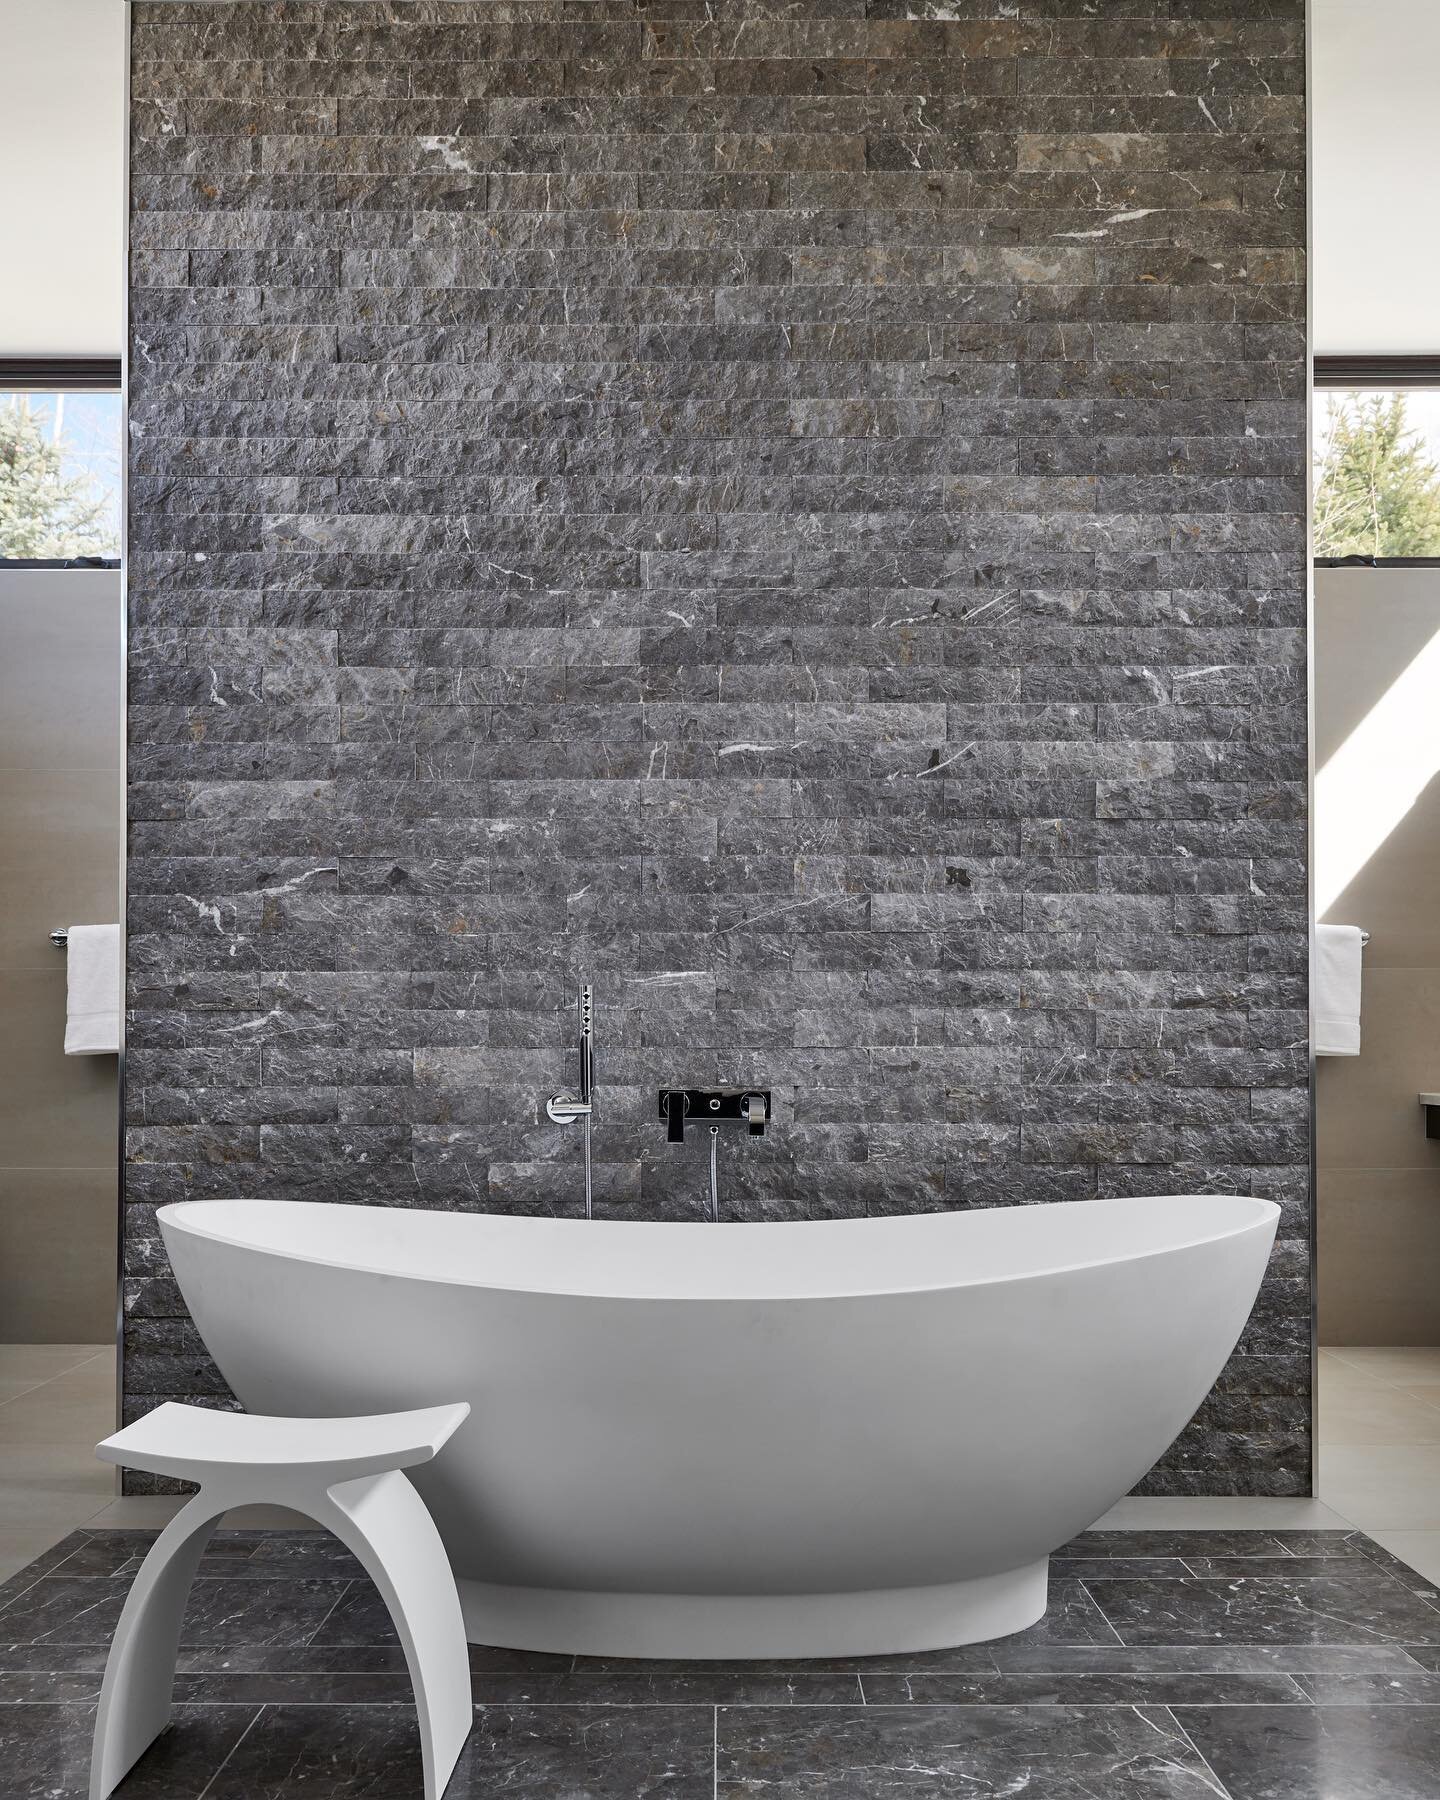 As it&rsquo;s starting to get colder out, wouldn&rsquo;t you love to end your day in this soaker tub

#kadesignworks
.
.
.
.
#aspenarchitects #aspensnowmass #snowmassvillage #aspenco #aspencolorado #architecturaldesign #architecture #architecture_bes